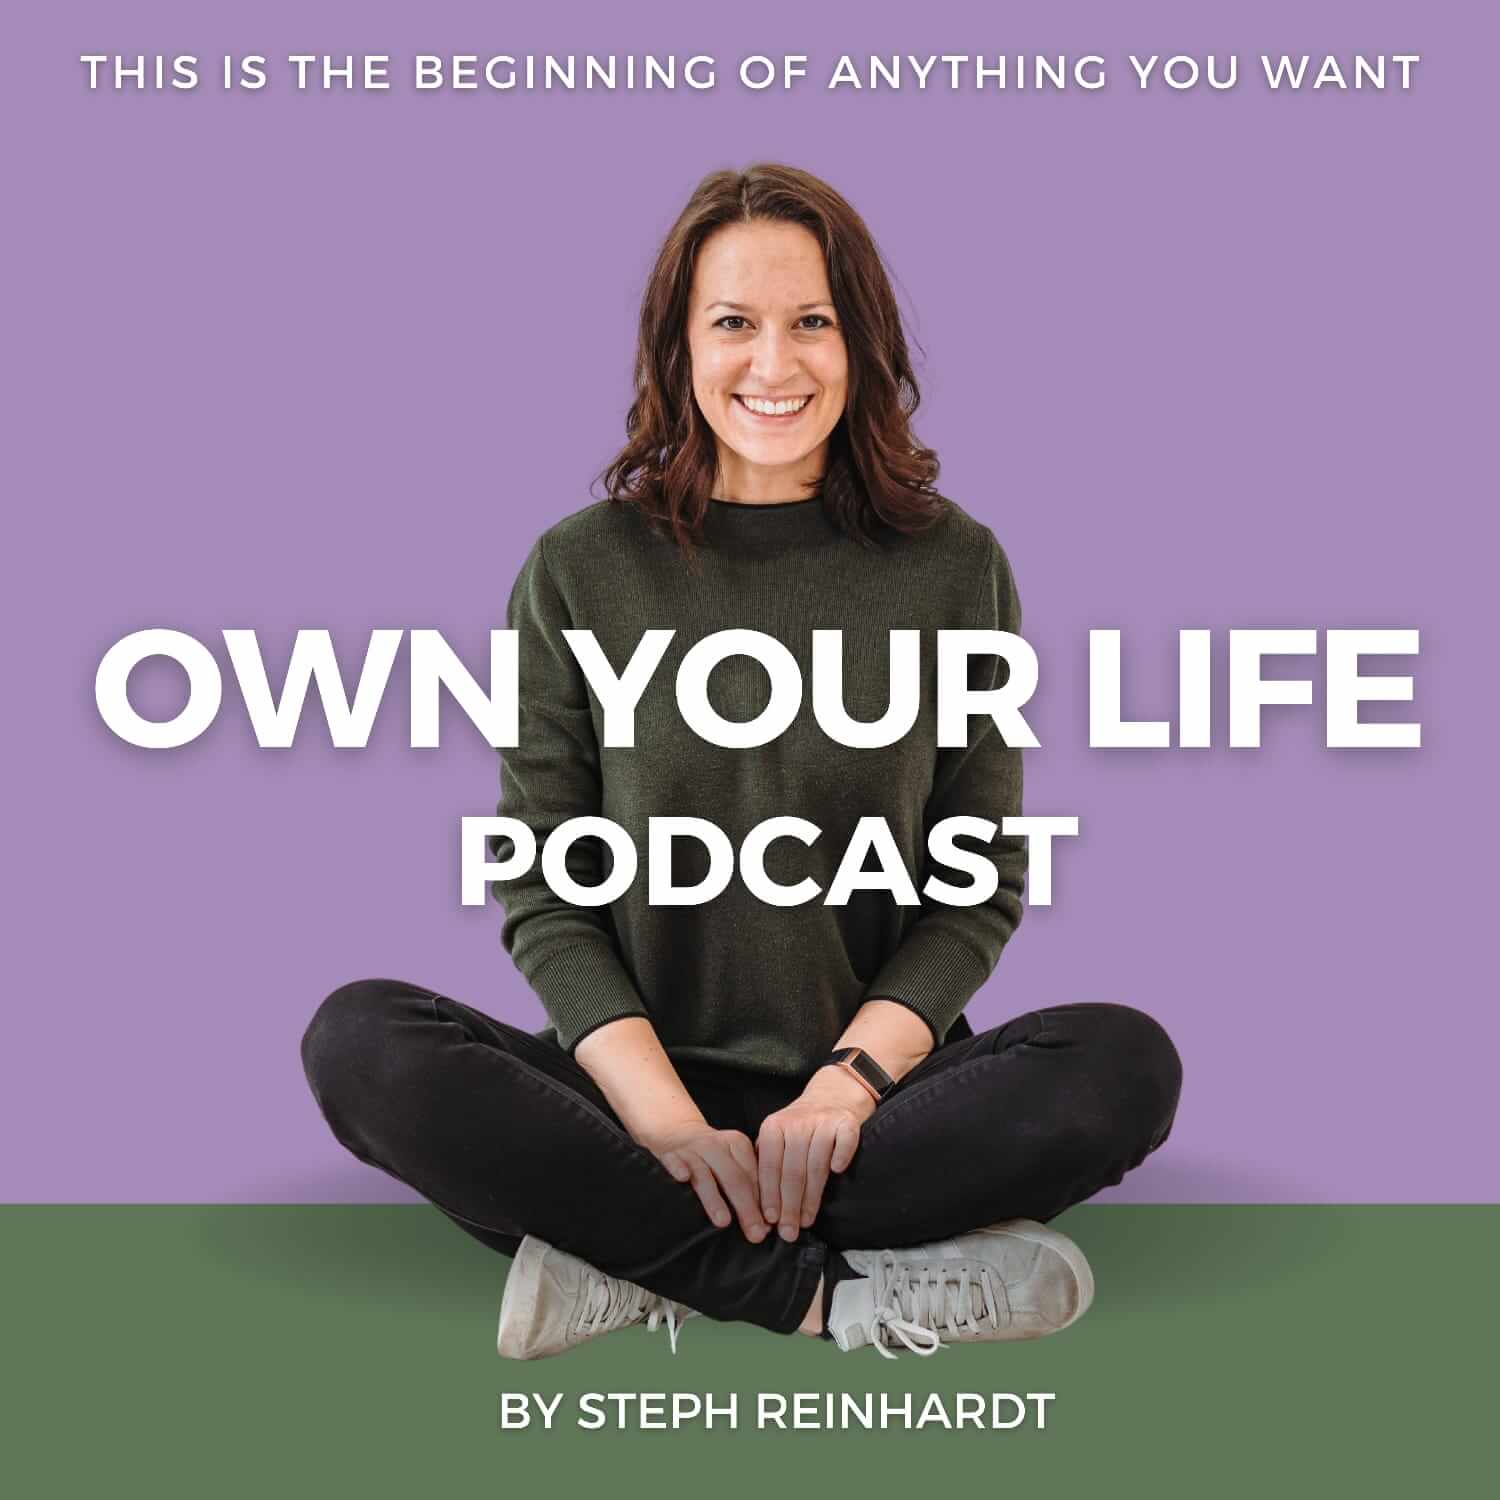 OWN YOUR LIFE Podcast by Steph Reinhardt